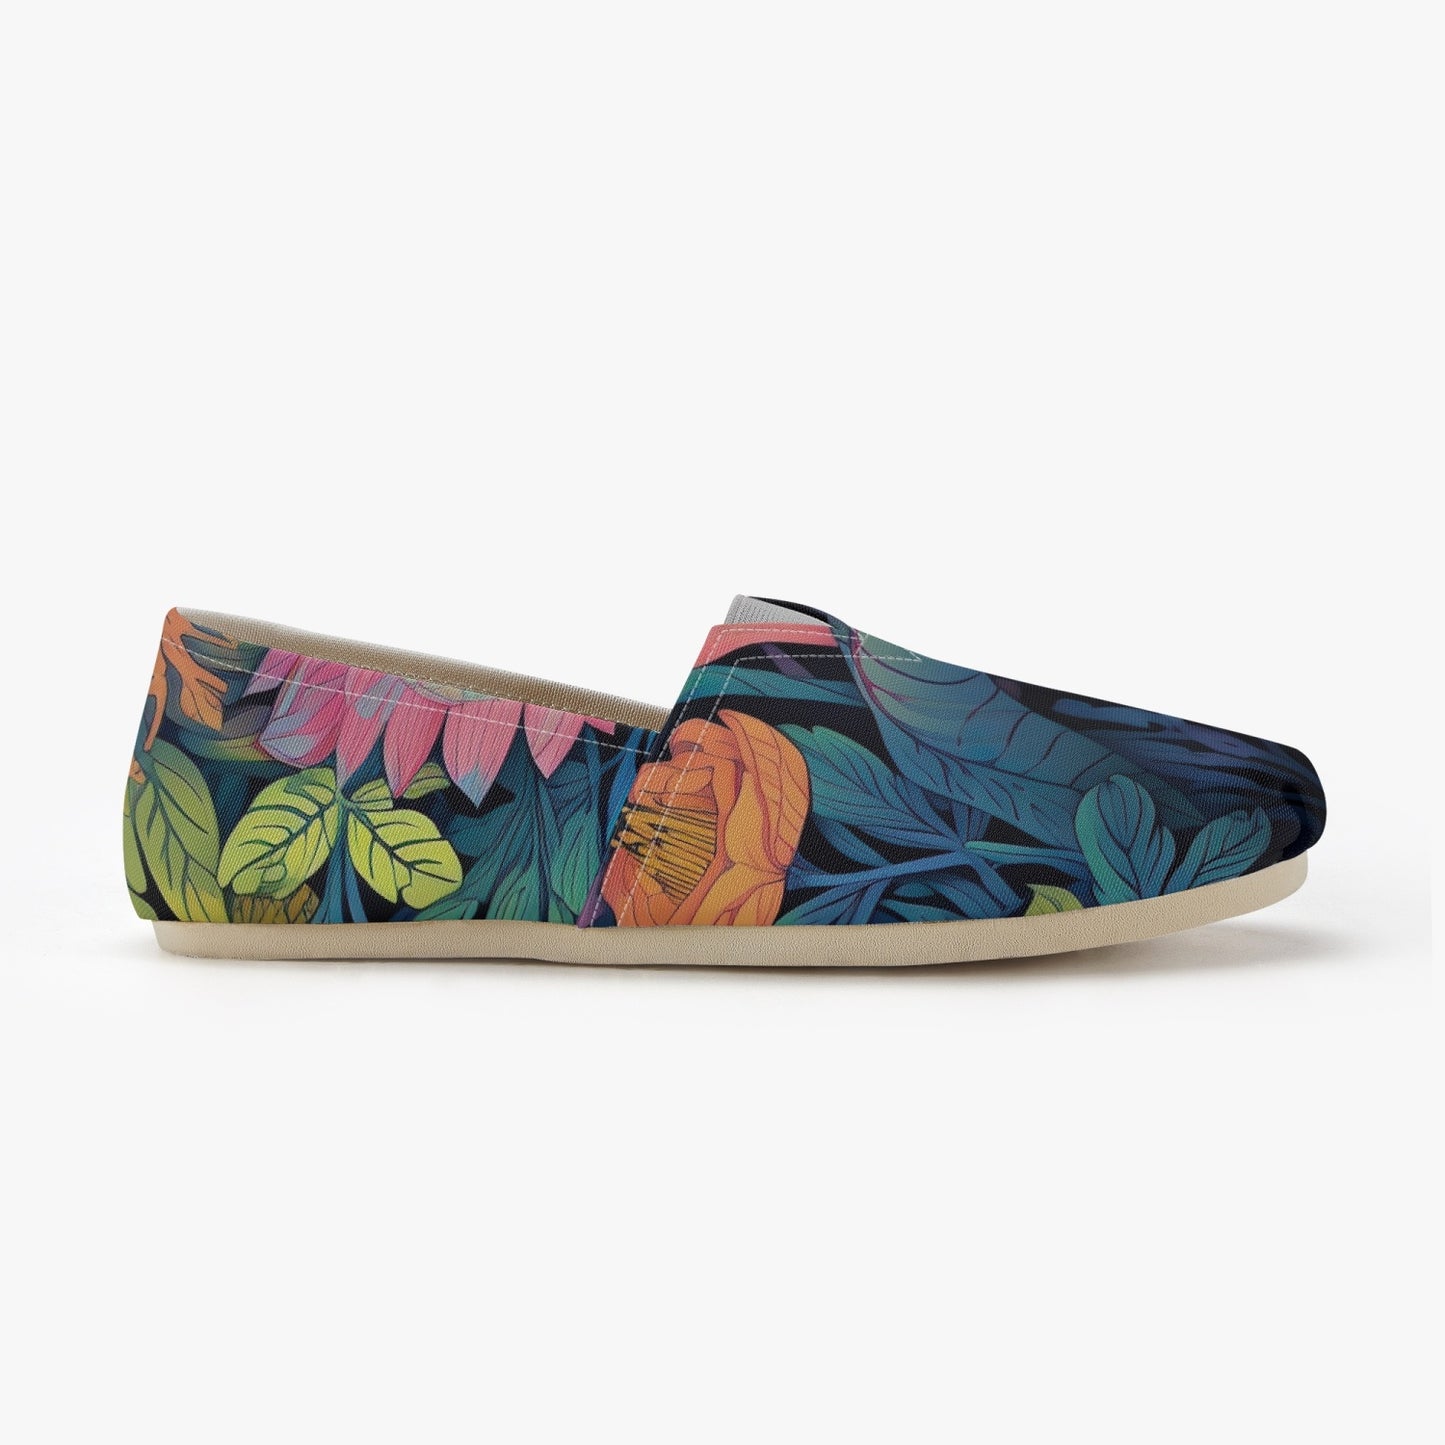 Psychedelic Floral "Toms"